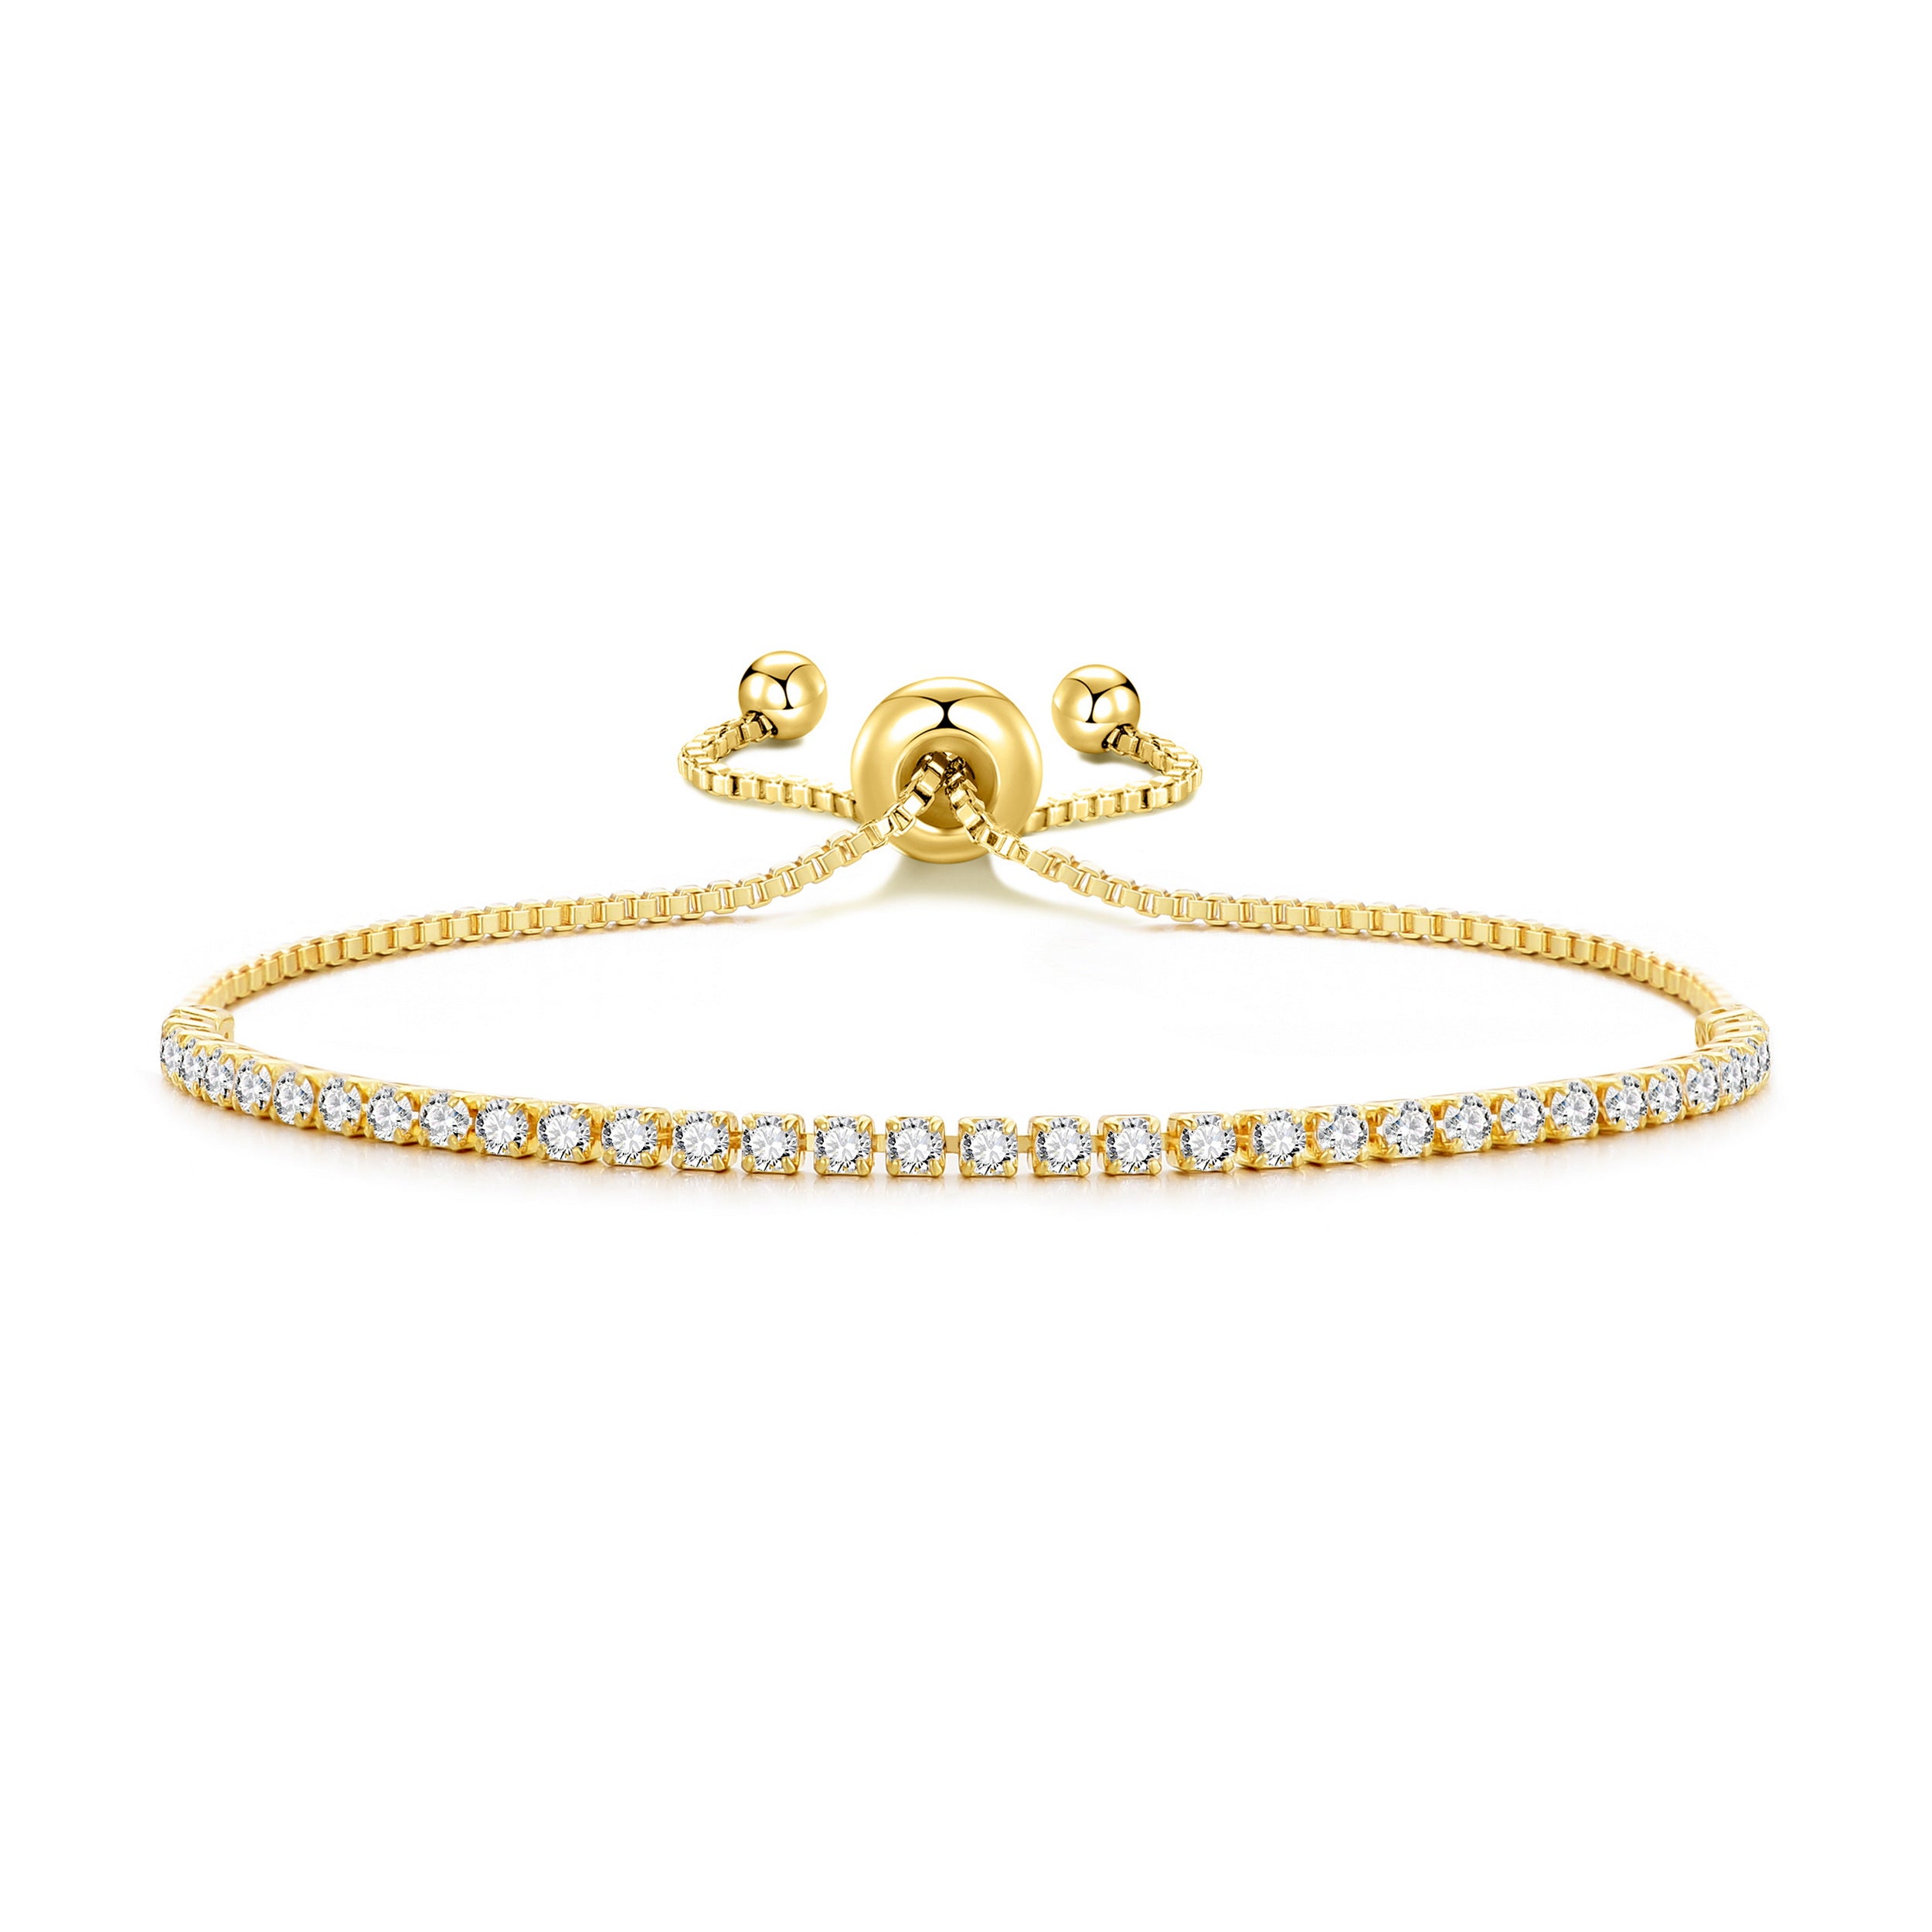 Gold Plated 2mm Adjustable Tennis Bracelet Created with Zircondia® Crystals